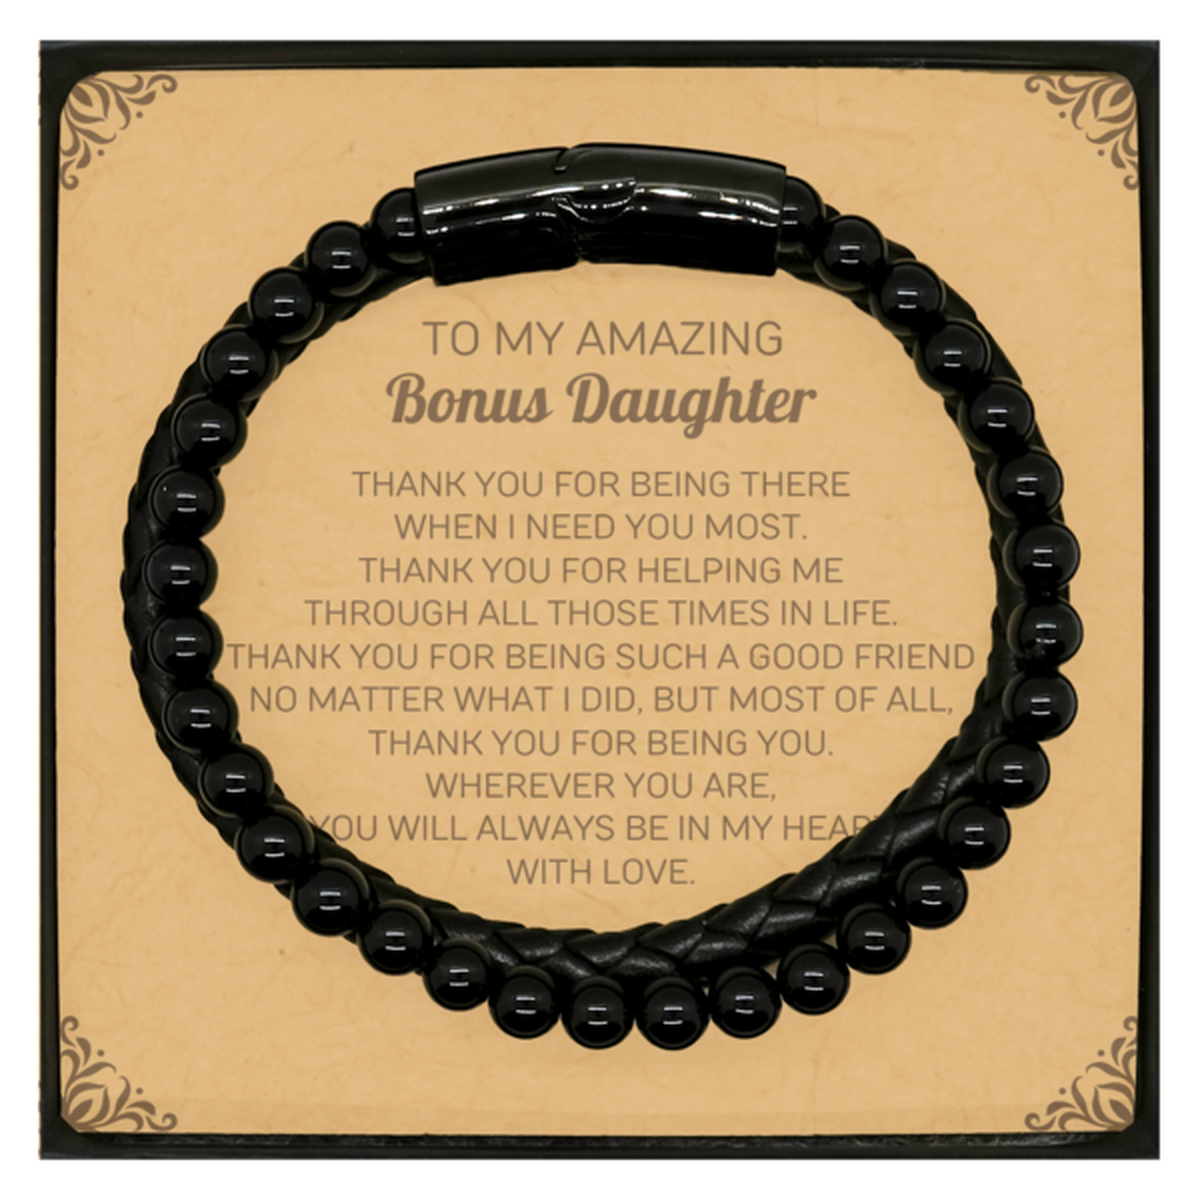 To My Amazing Bonus Daughter Stone Leather Bracelets, Thank you for being there, Thank You Gifts For Bonus Daughter, Birthday, Christmas Unique Gifts For Bonus Daughter